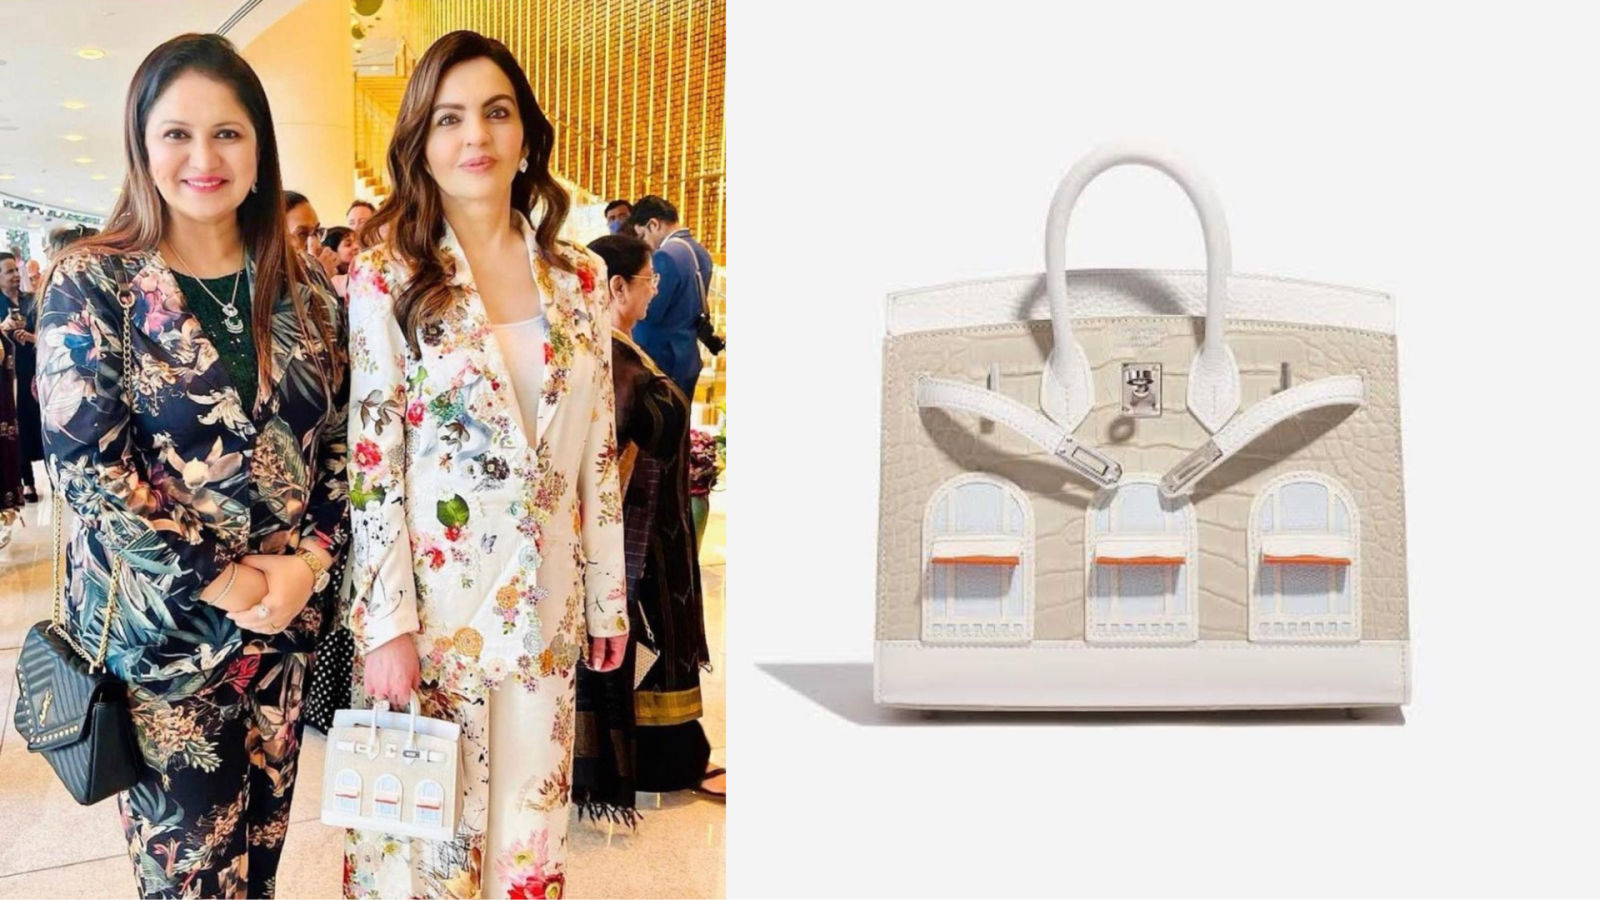 Expensive for whaaat? Why are Hermes Birkin bags so pricey?